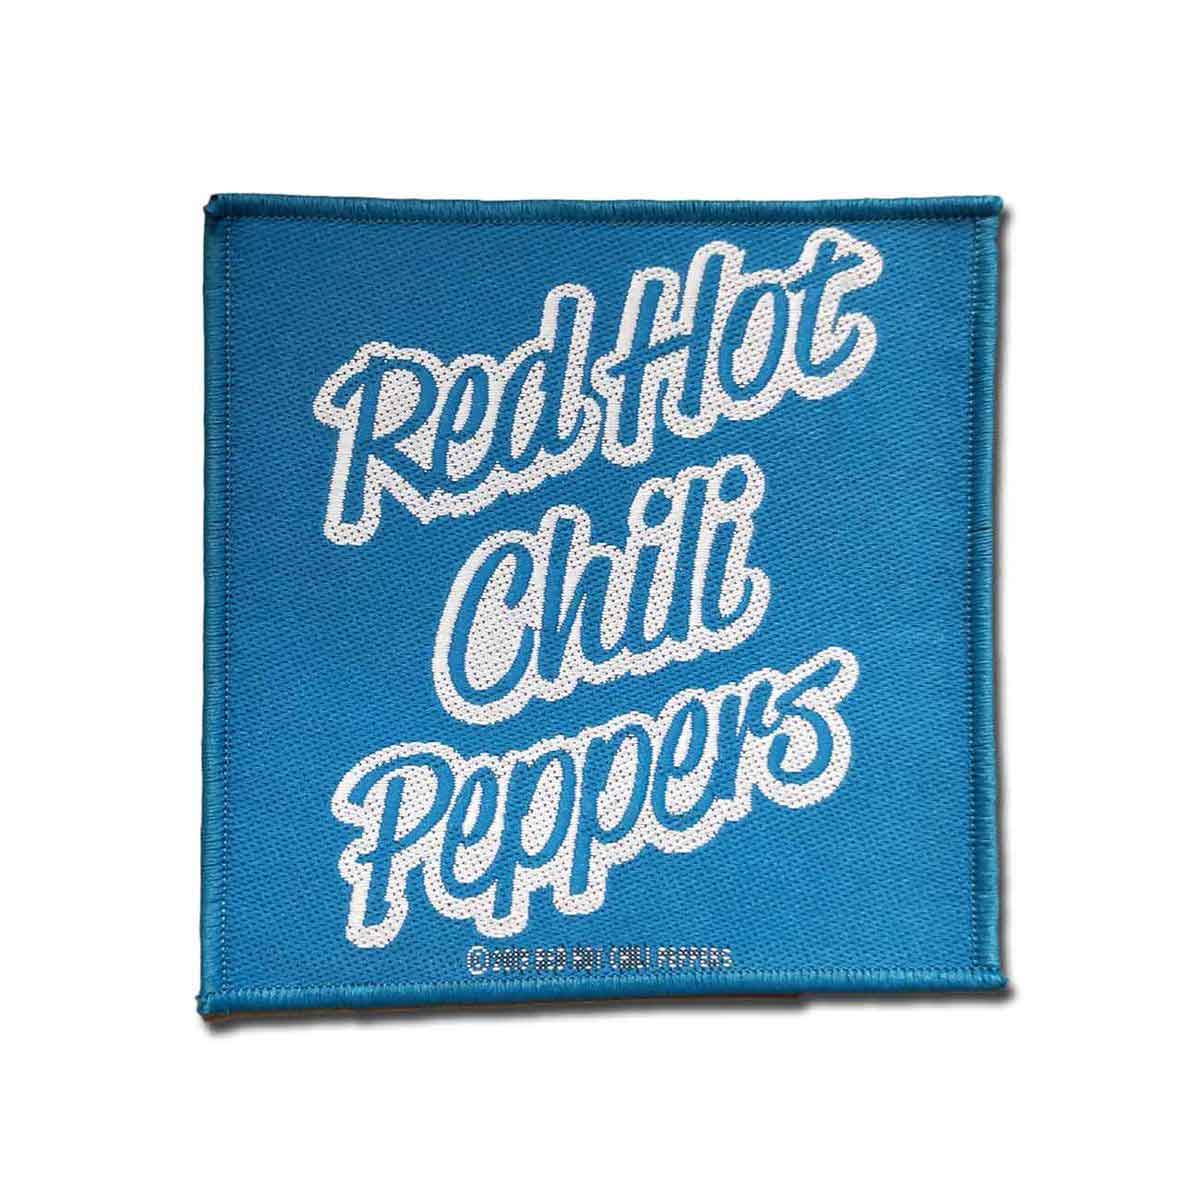 Red Hot Chili Peppers パッチ／ワッペン レッド・ホット・チリ・ペッパーズ Track Top - バンドTシャツの通販